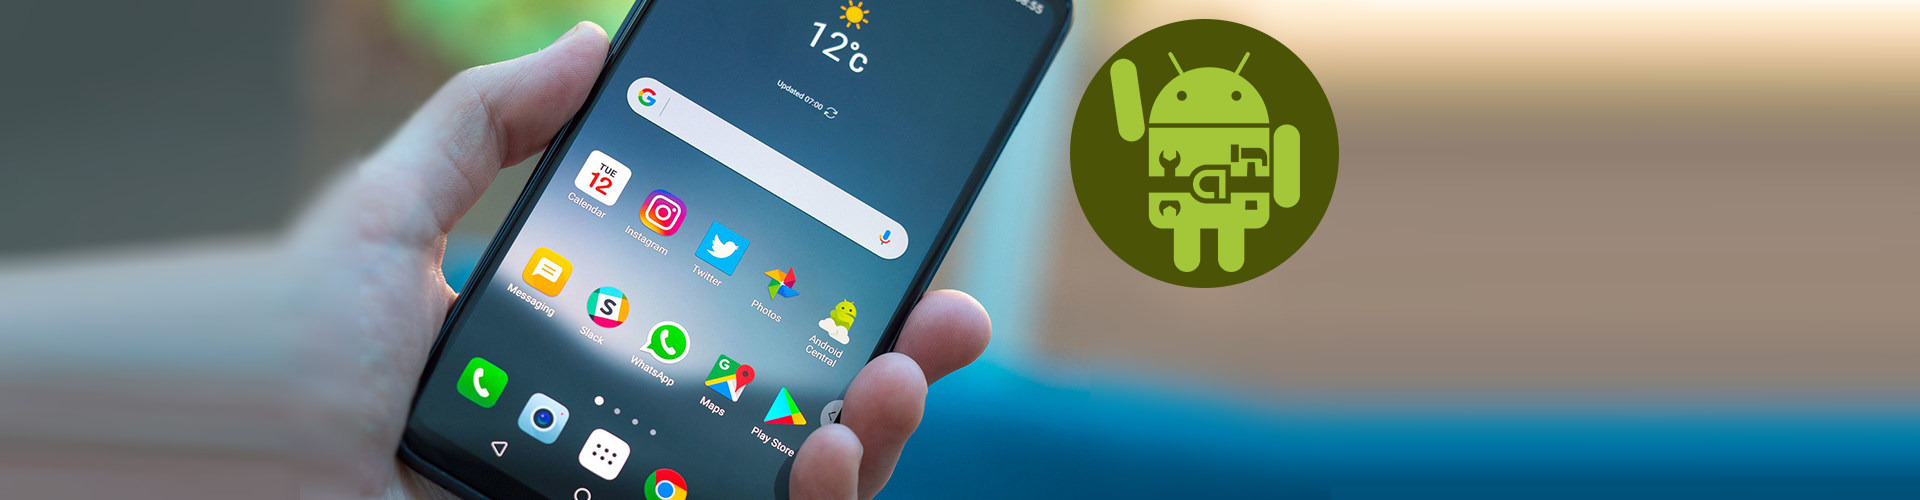 How to develop Android apps?